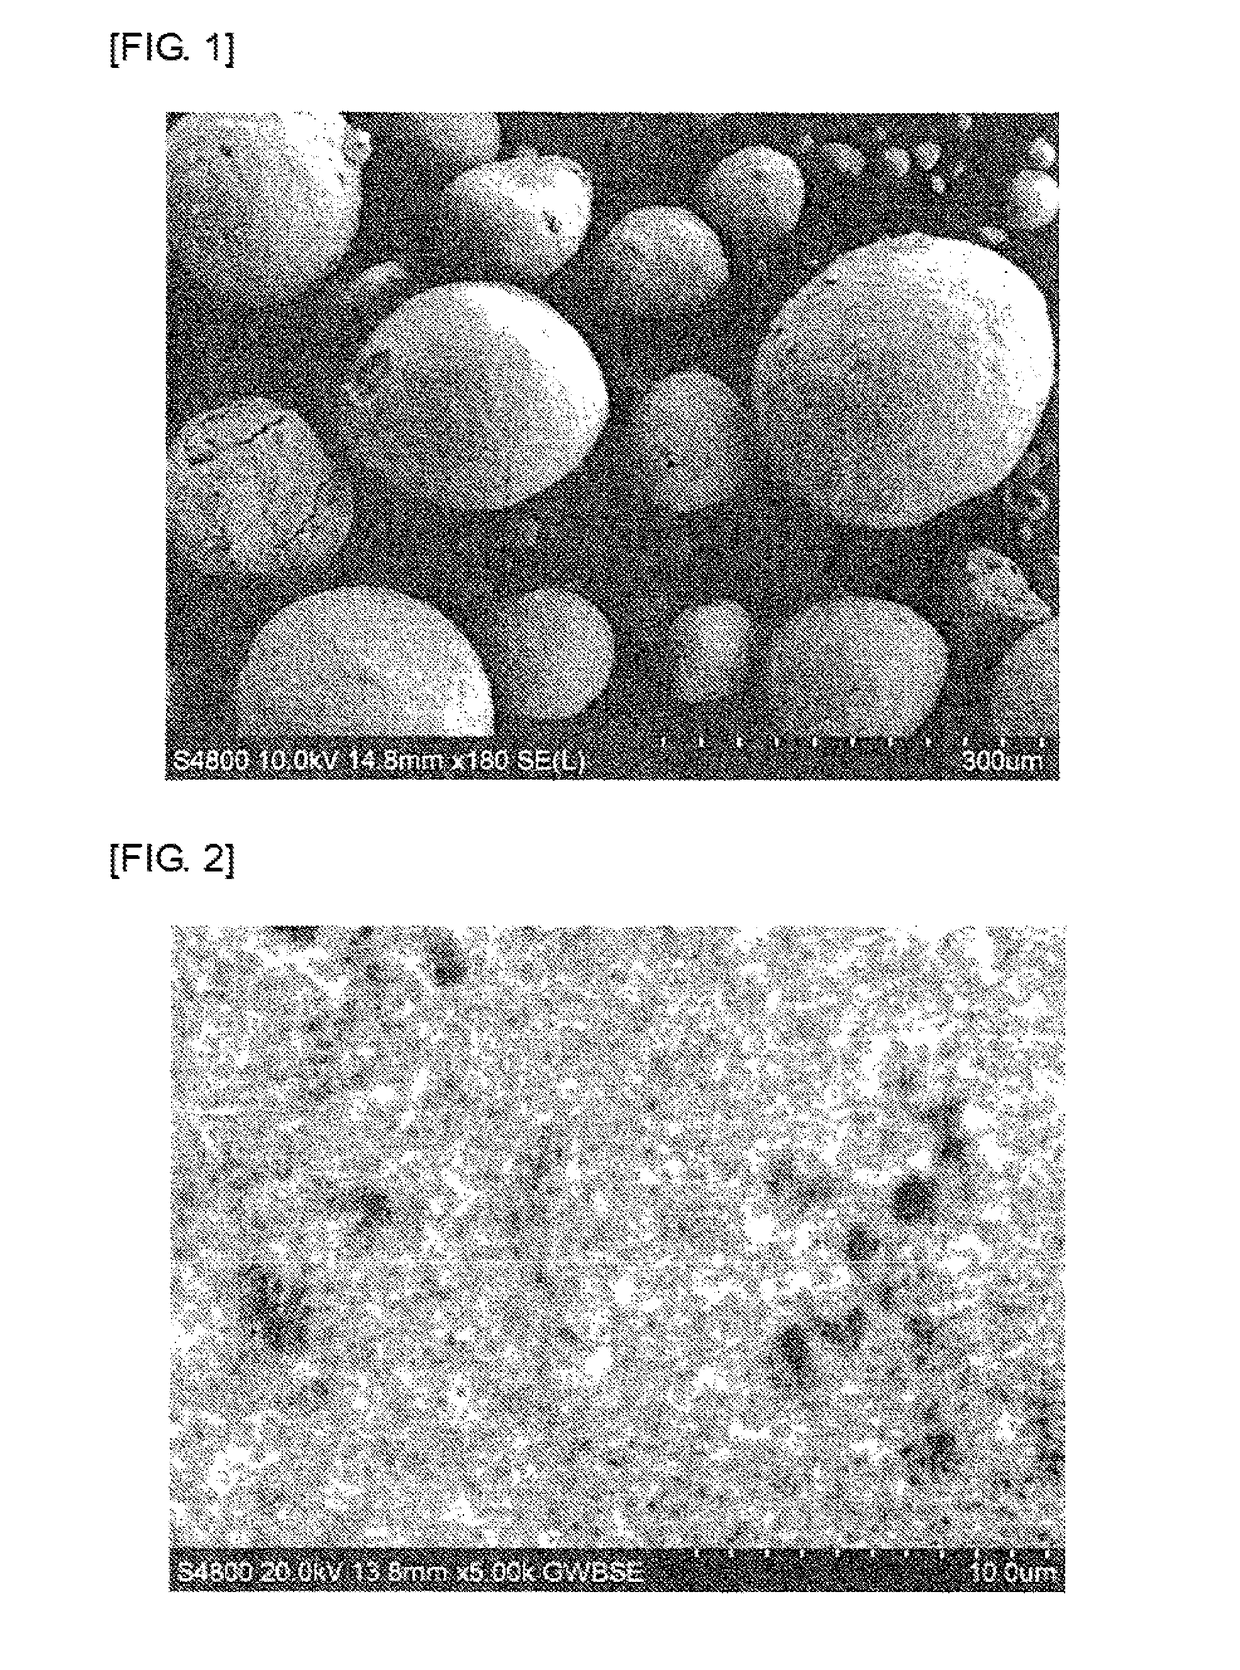 Porous titanate compound particles and method for producing same